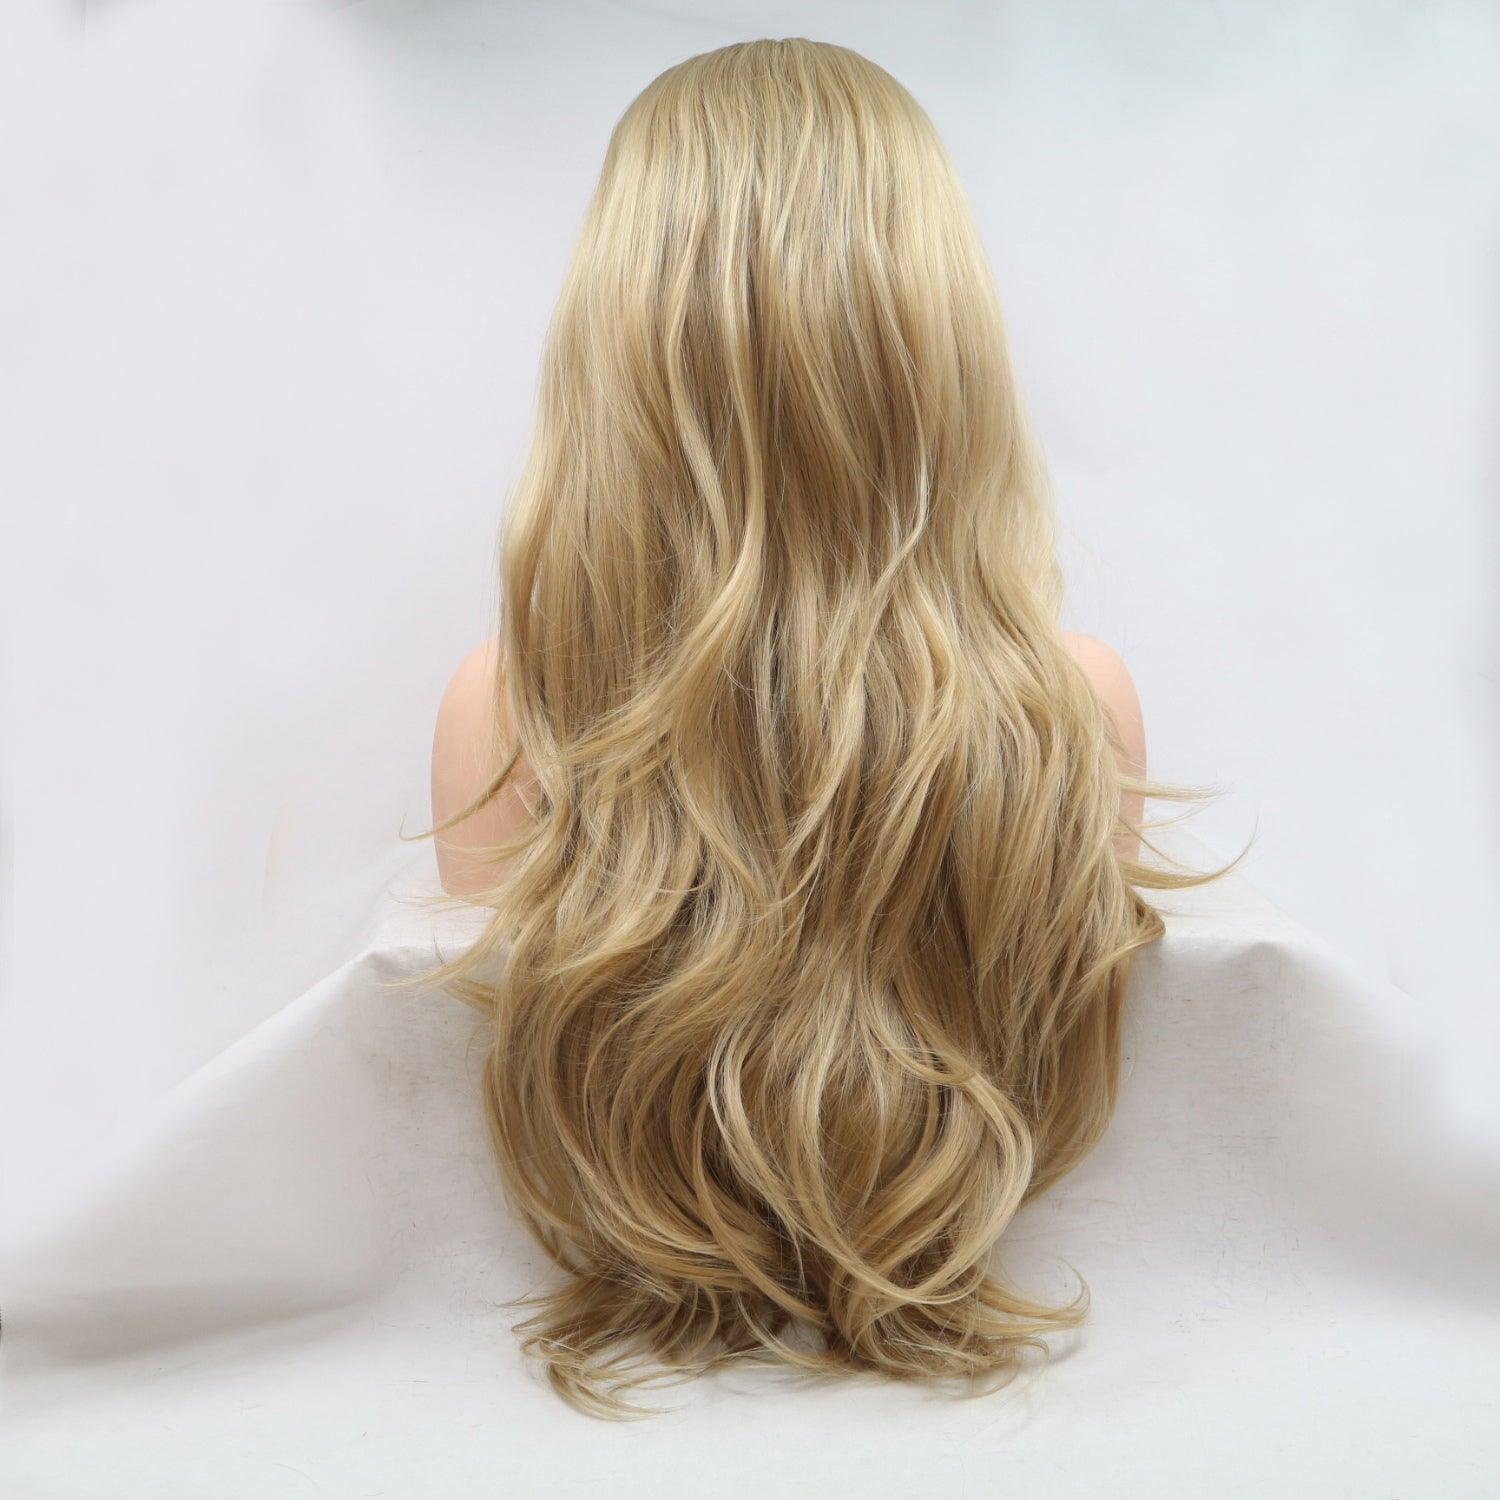 a woman's long blonde hair is shown from the back